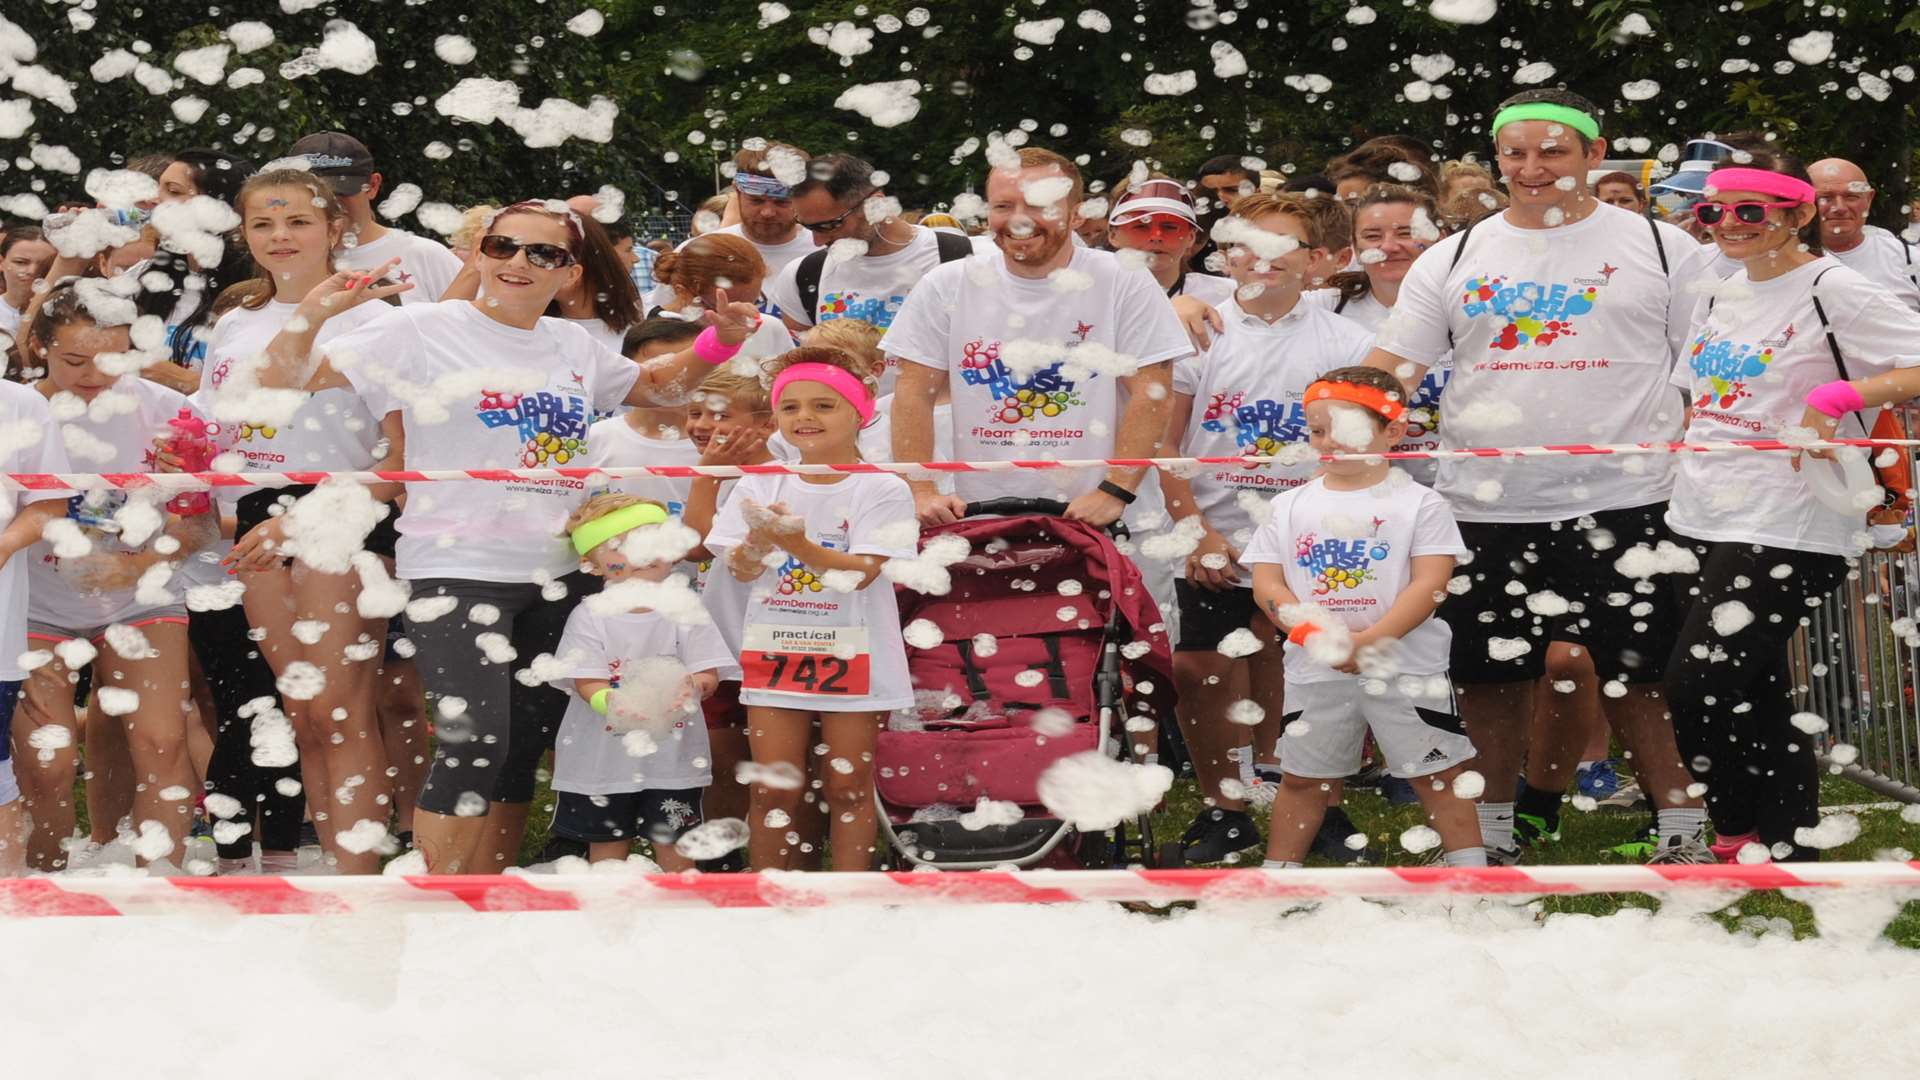 Central Park was transformed into a giant foam party for the Bubble Rush event.